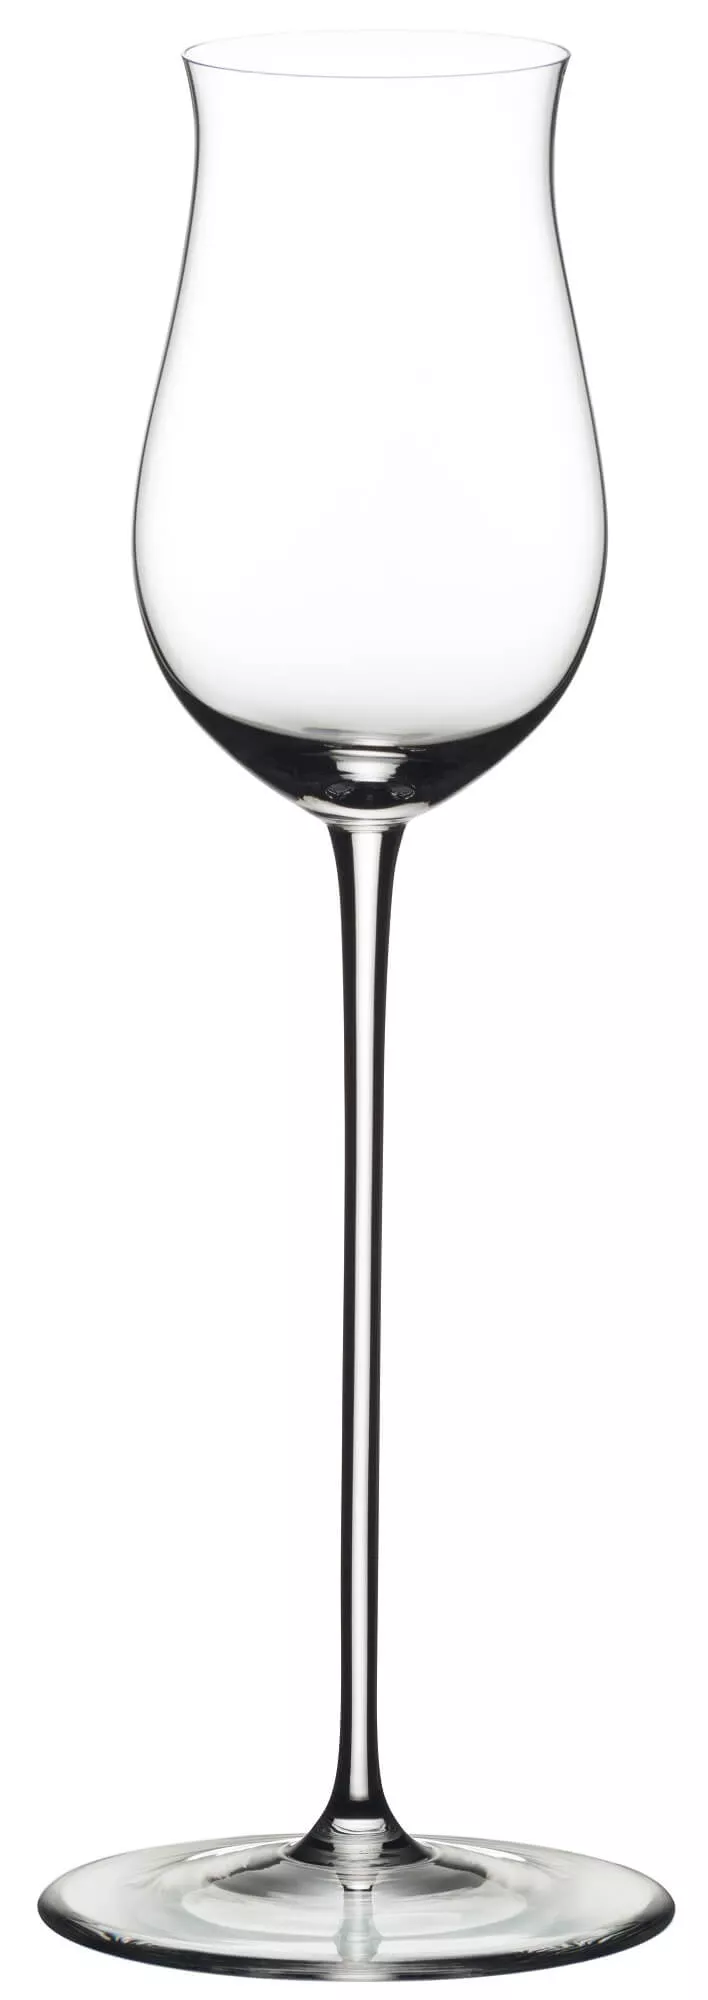 Riedel Veritas New World Pinot Noir Wine Glass – Accents On Gifts